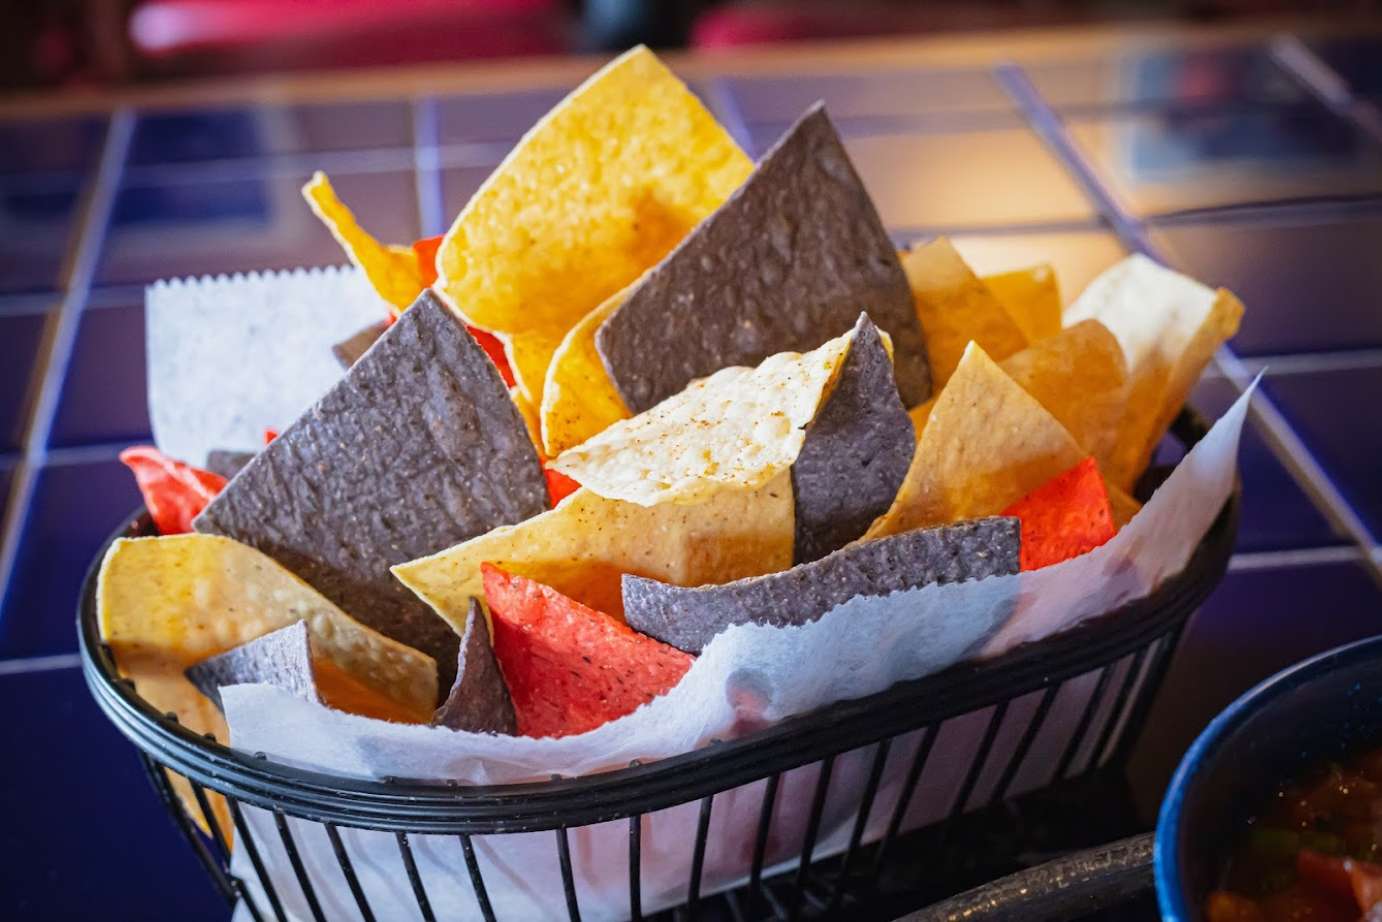 Basket of multi-colored tortilla chips